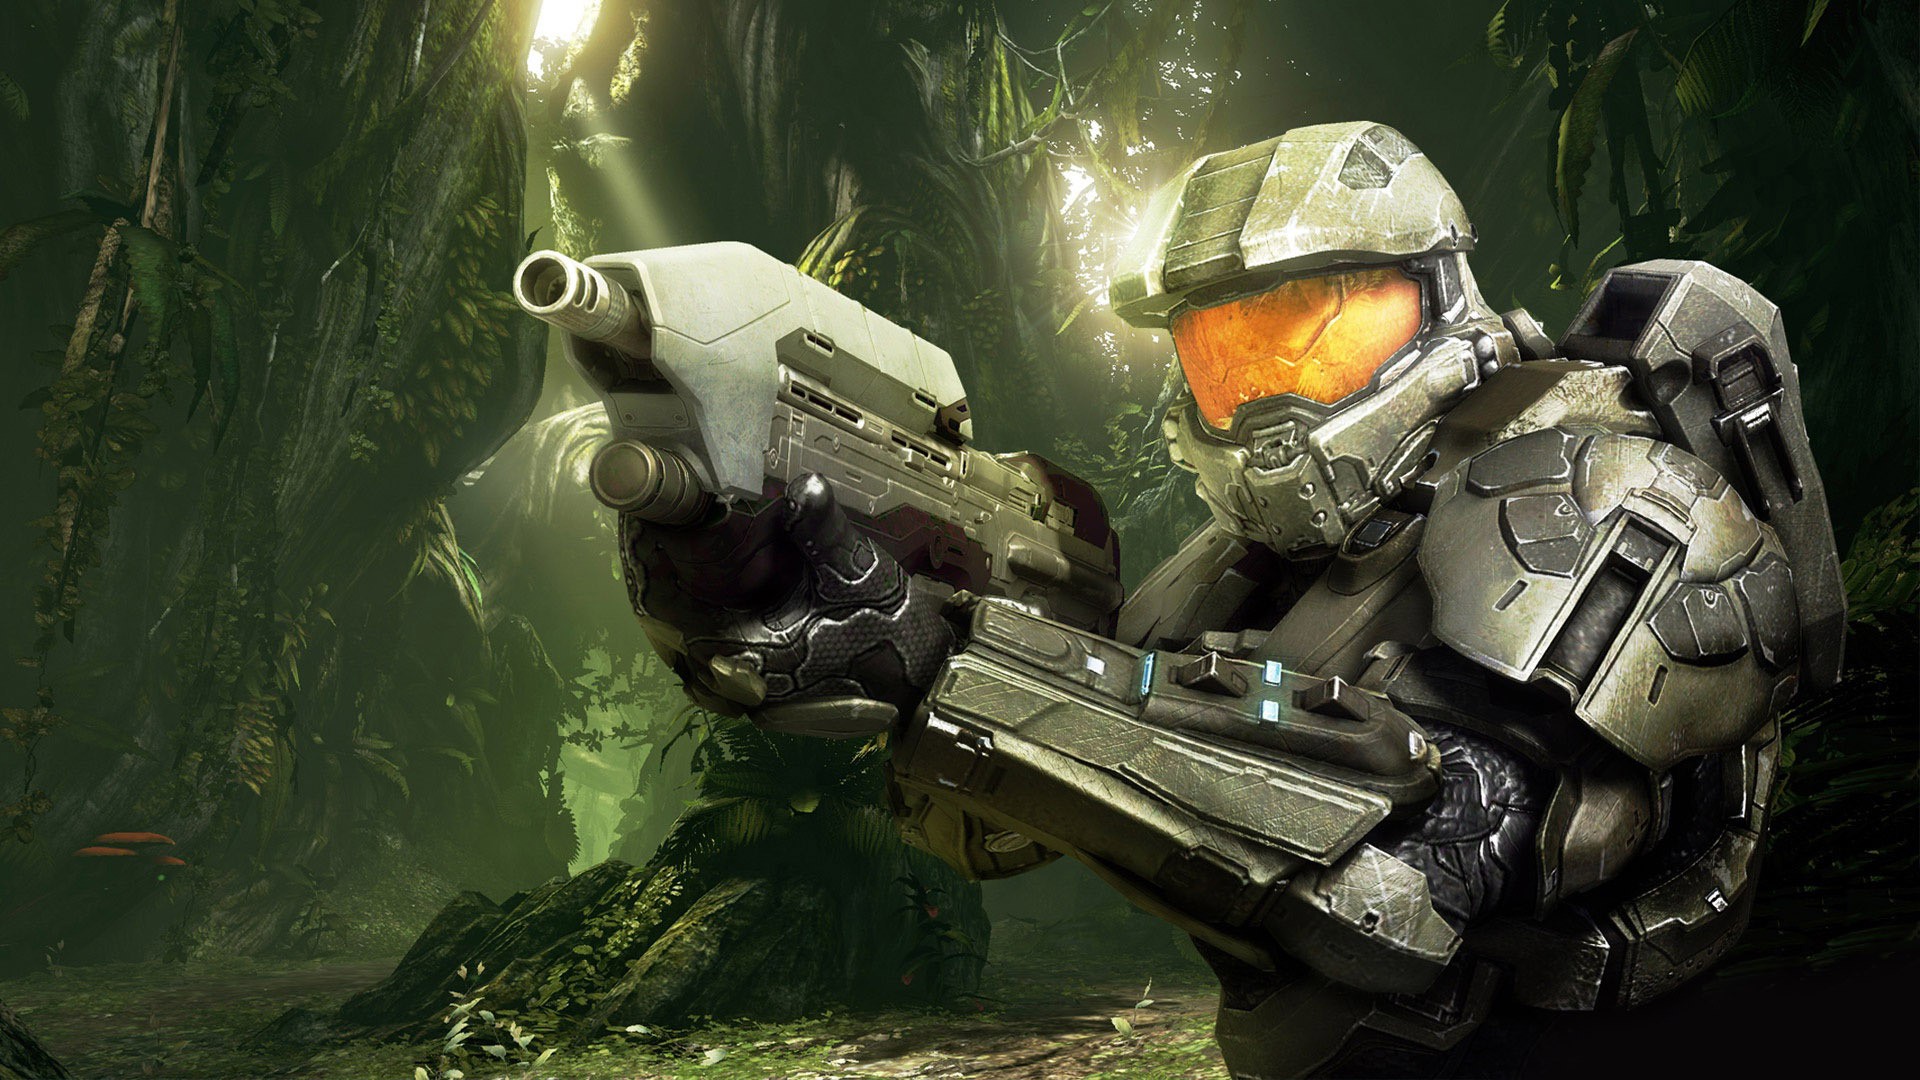 Halo Master Chief Halo 4 Video Games Wallpapers Hd Desktop And Mobile Backgrounds